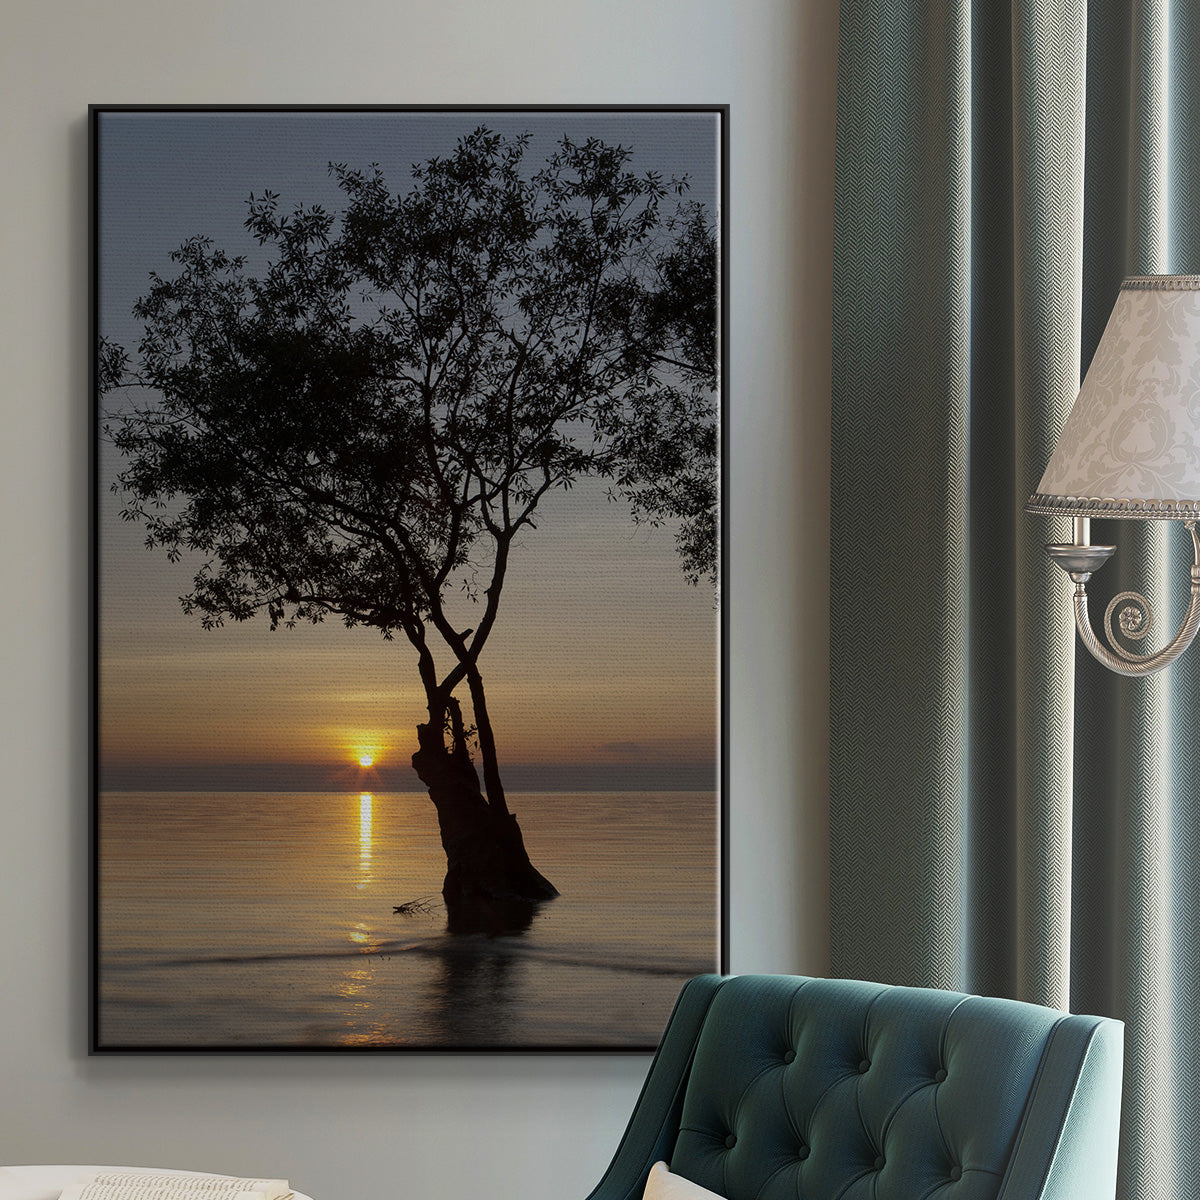 Sunset Silhouette - Framed Premium Gallery Wrapped Canvas L Frame - Ready to Hang